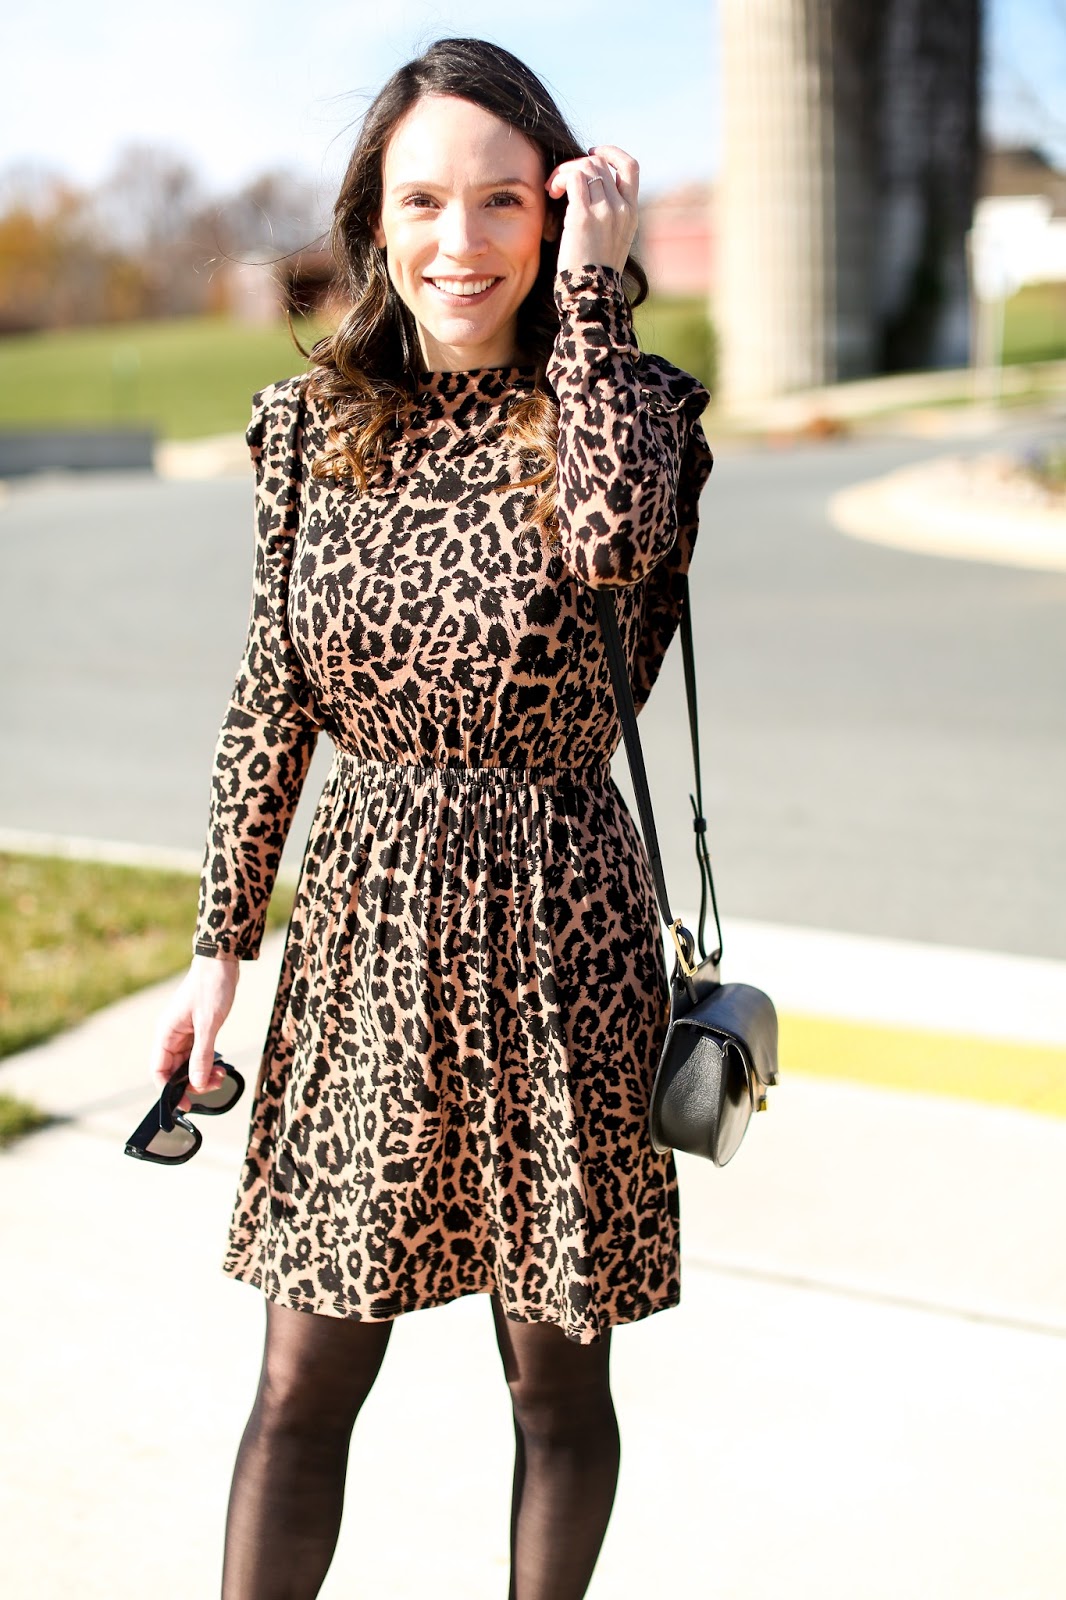 Leopard Print For the Holidays